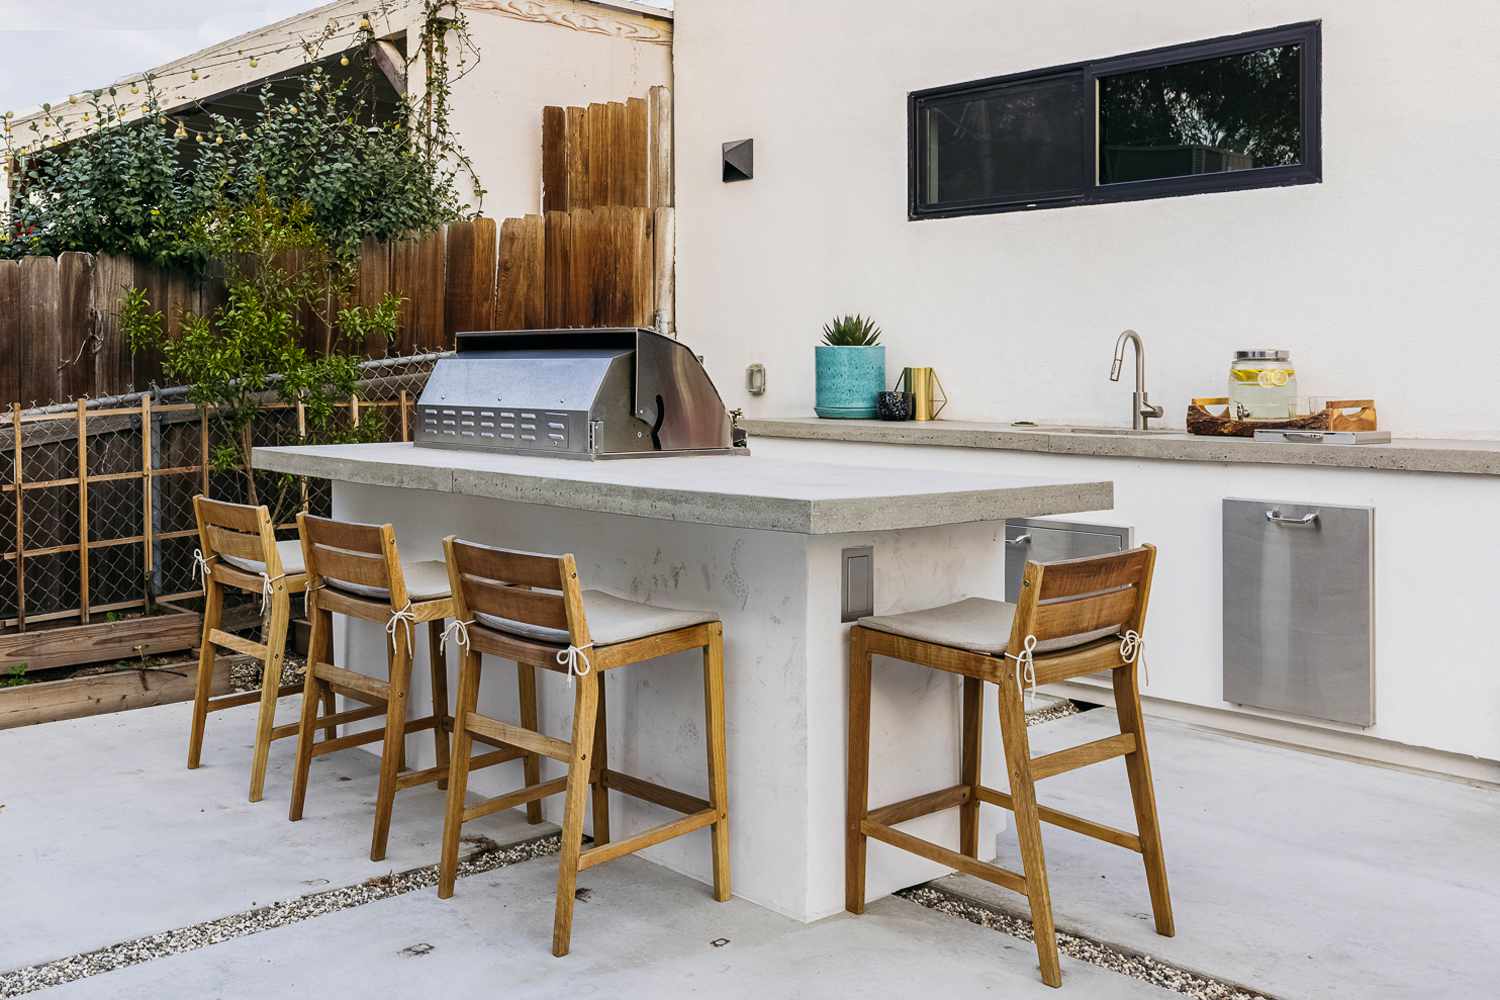 What Makes A Perfect Outdoor Kitchen? – The Home Answer